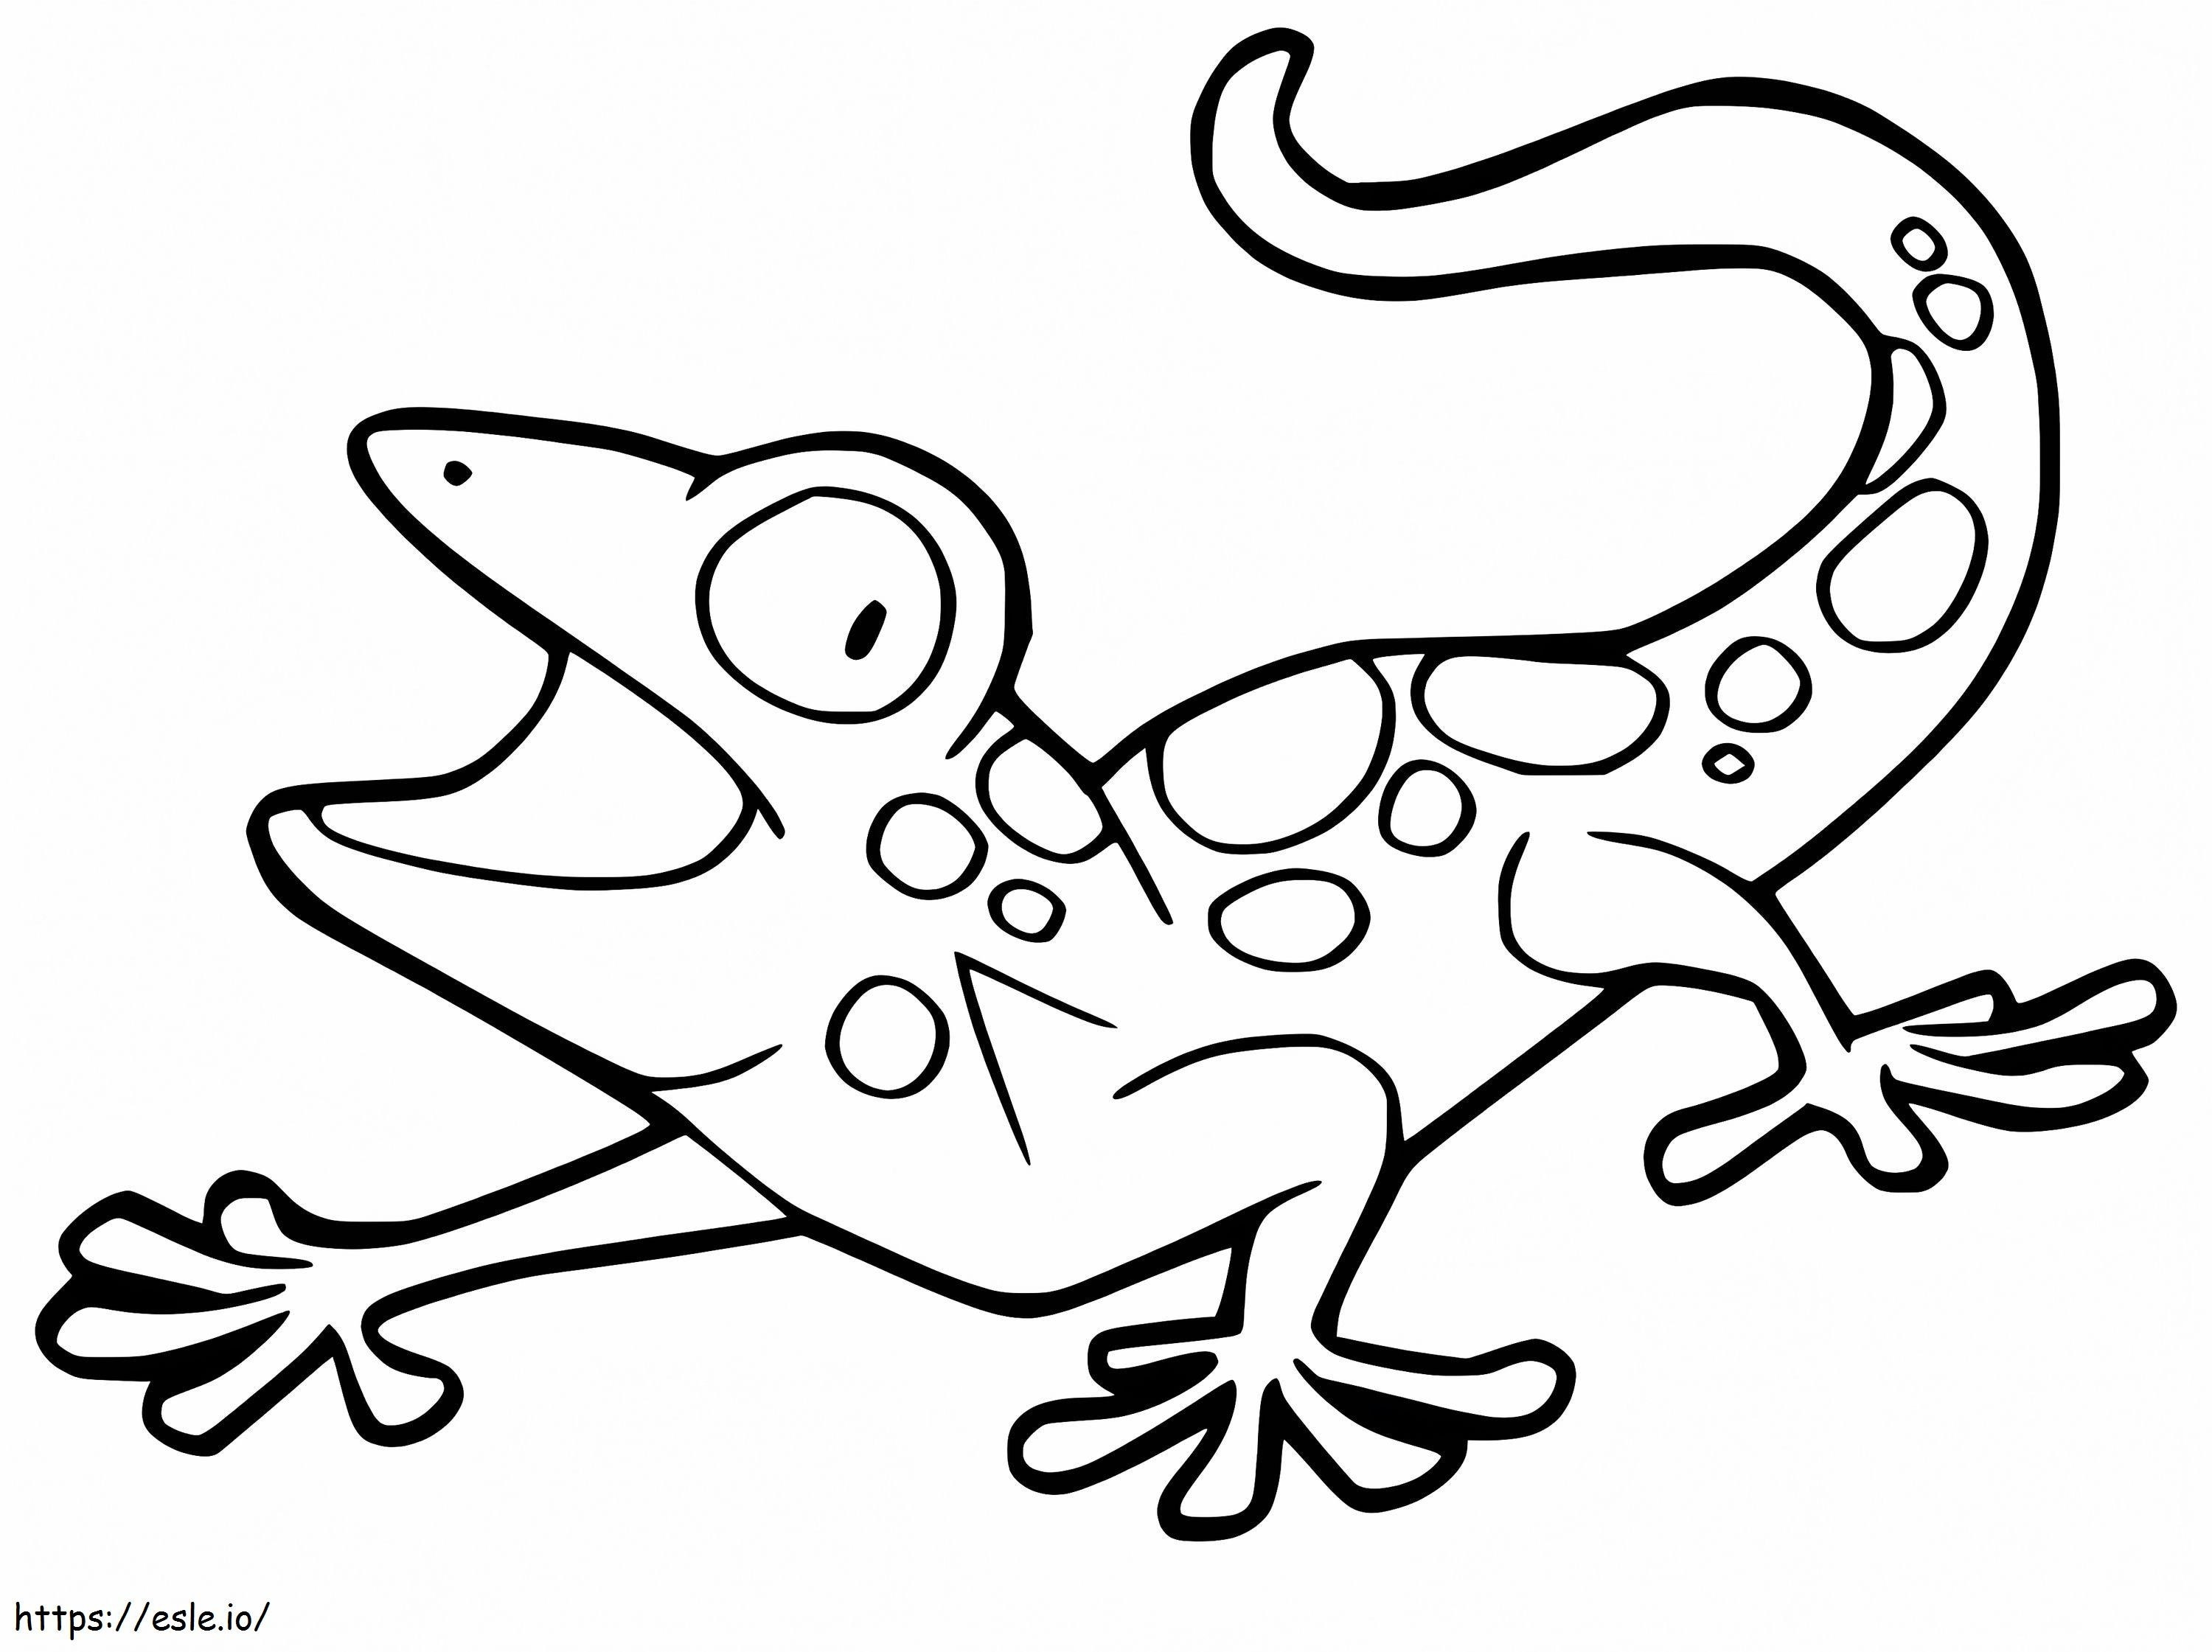 Adorable Gecko coloring page